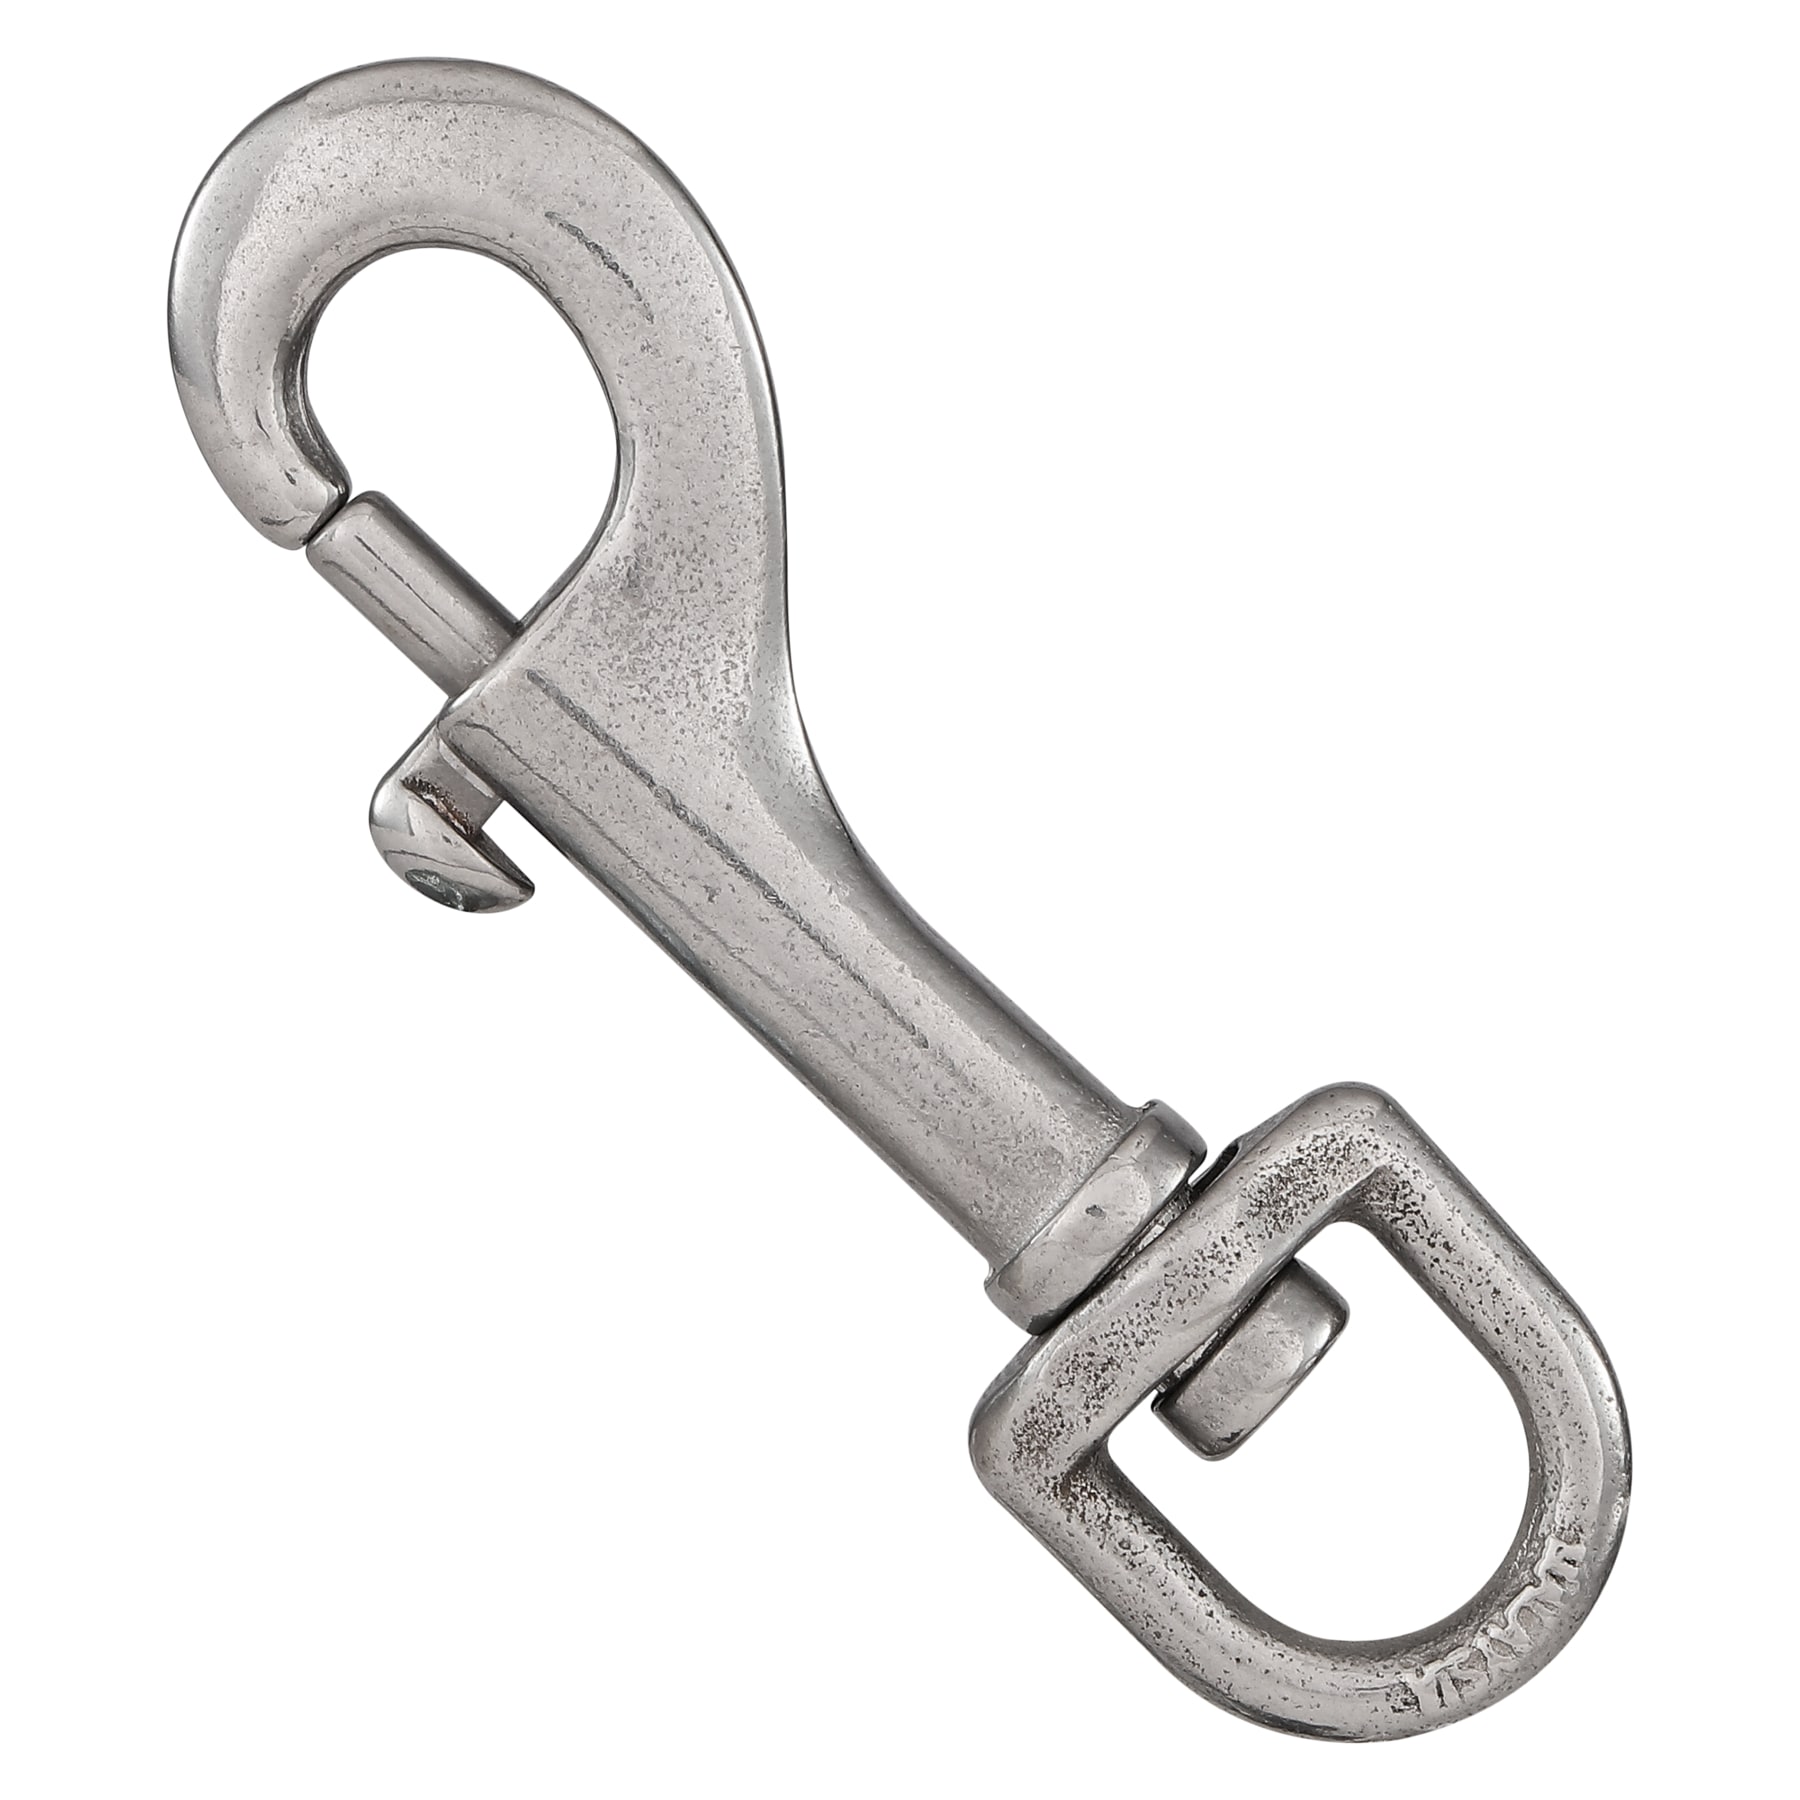 Lehigh 70 lb. 3 in. x 1/2 in. Nickel-Plated Steel Swivel Eye Bolt-Type Snap  Hooks (2-Pack) 7003S-6 - The Home Depot